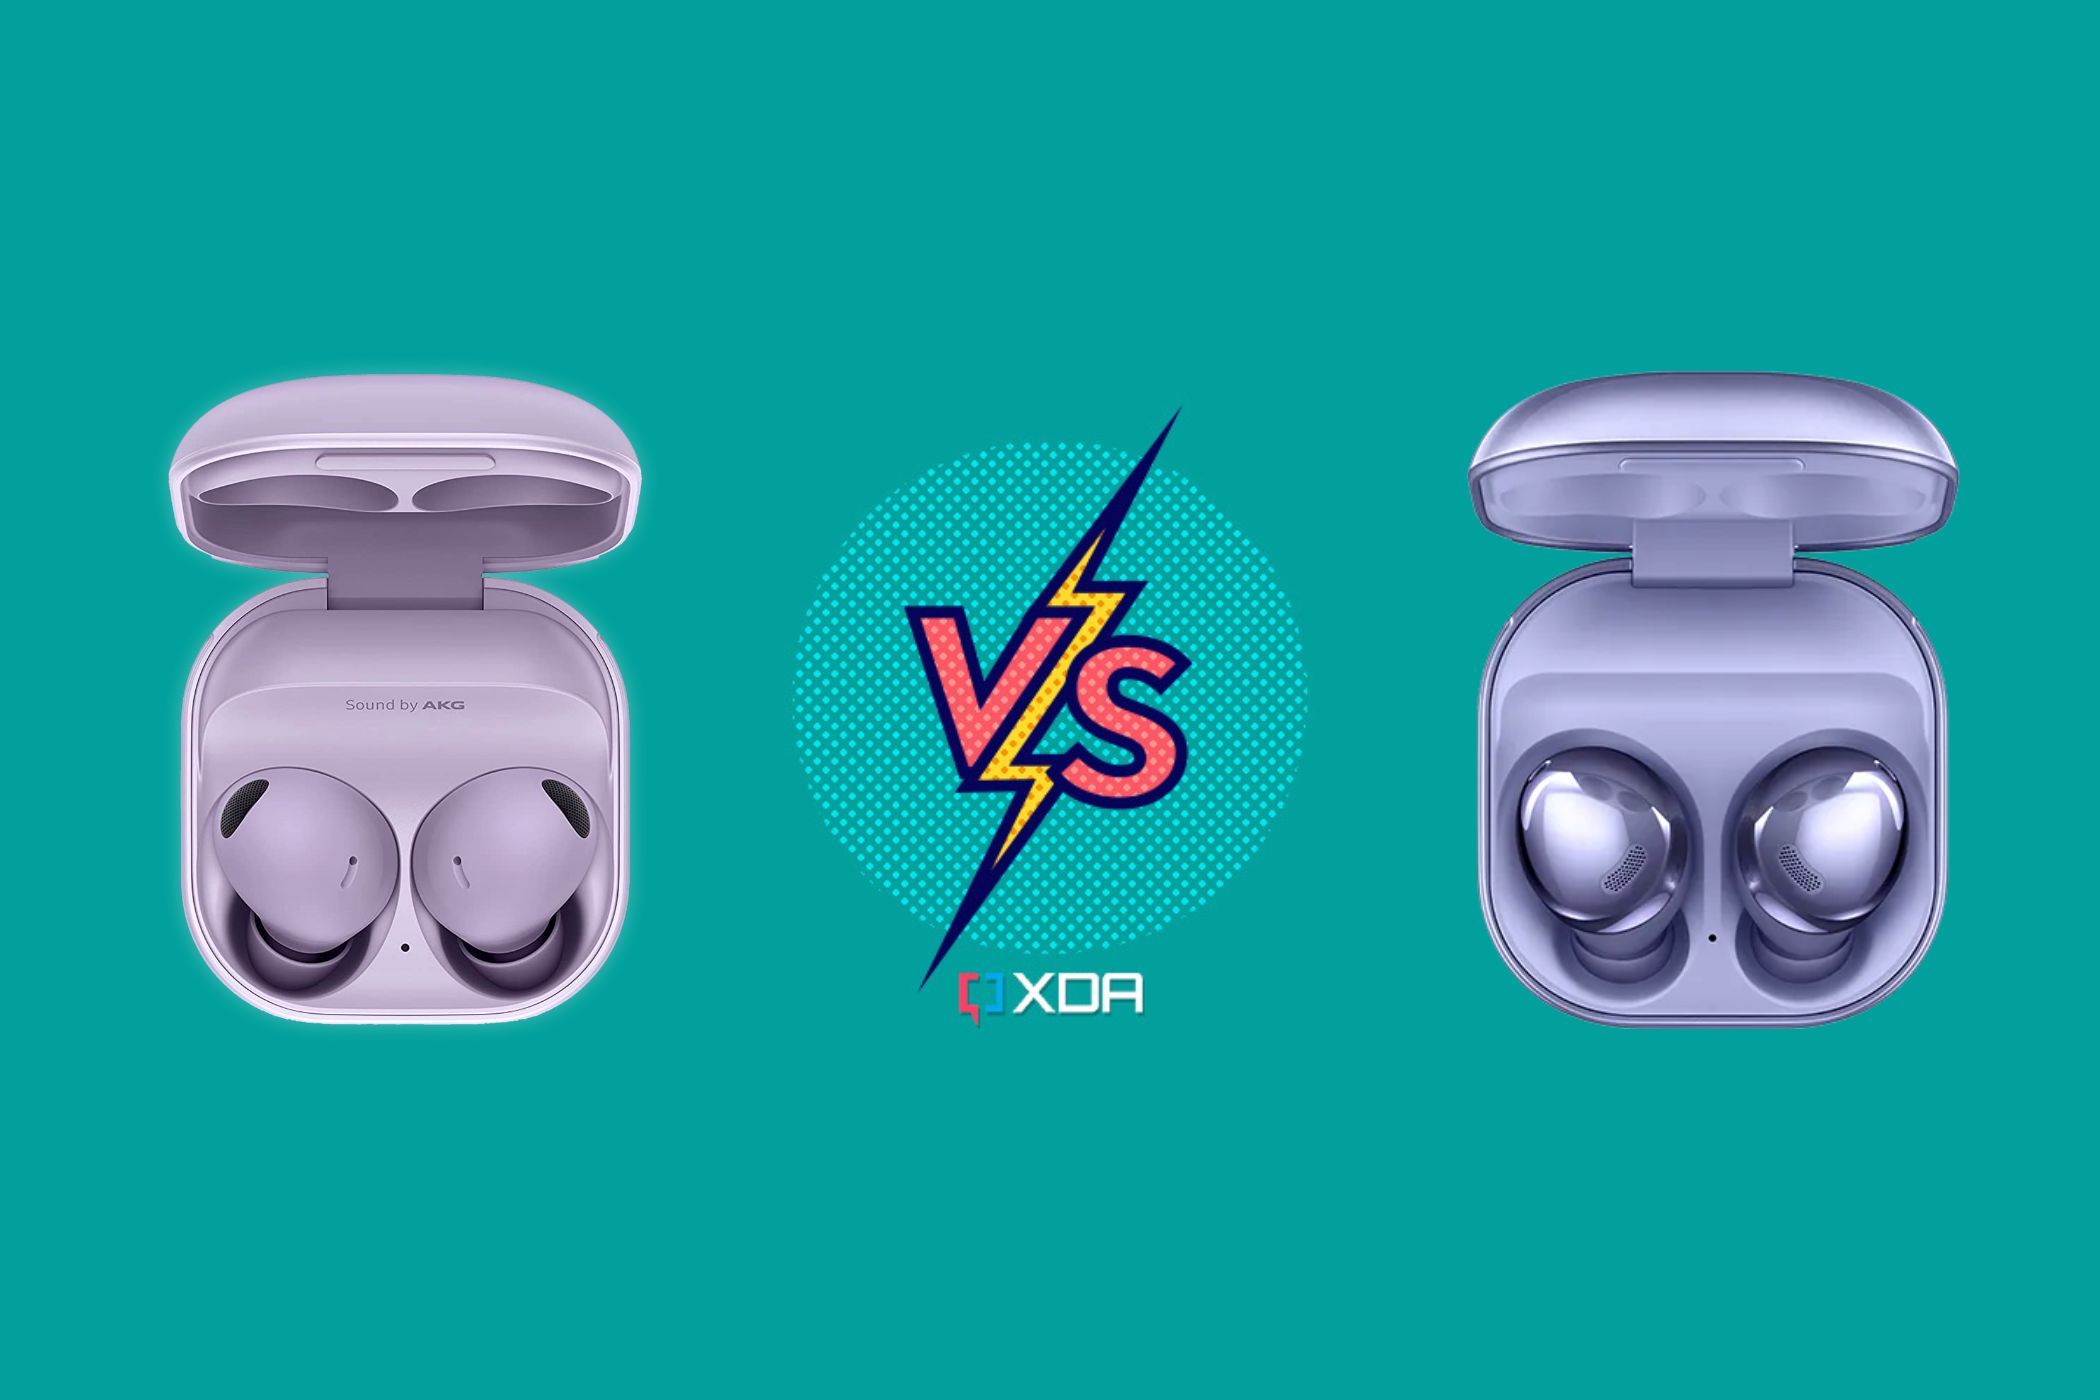 An image showing the Samsung Galaxy Buds 2 Pro and Galaxy Buds Pro side-by-side with an XDA logo and 'vs' text in the middle.